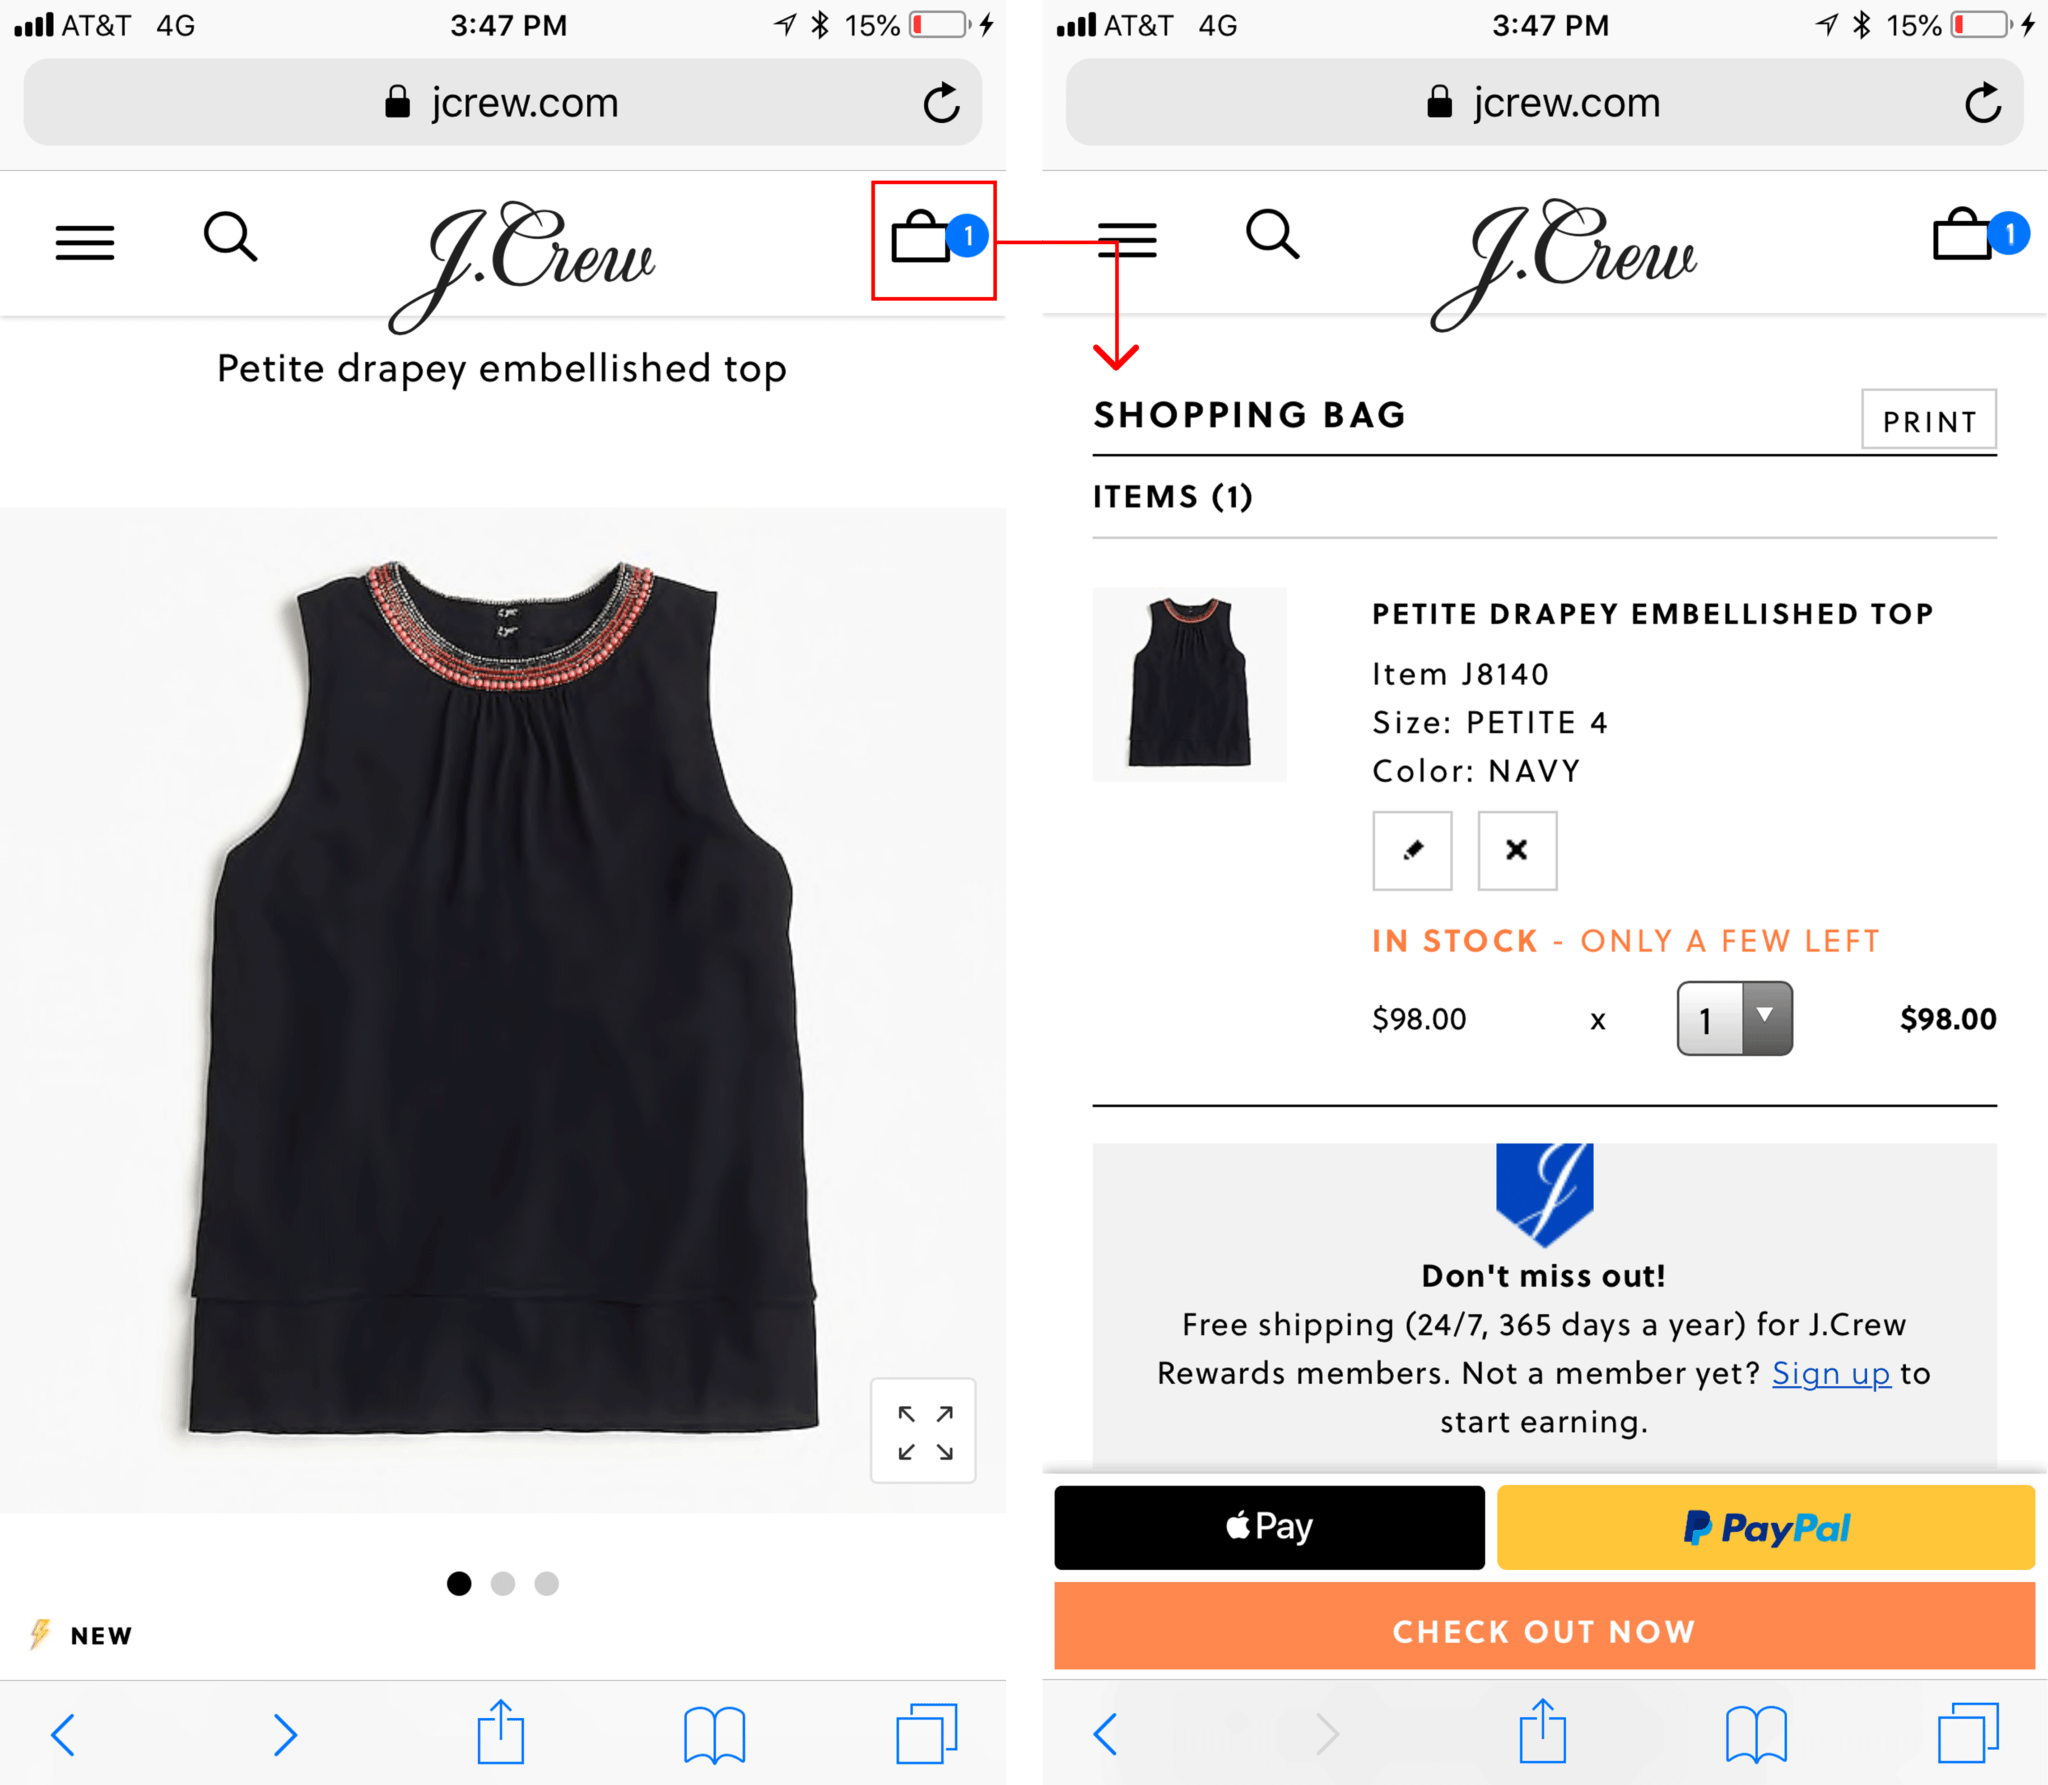 The Mobile Checkout Experience